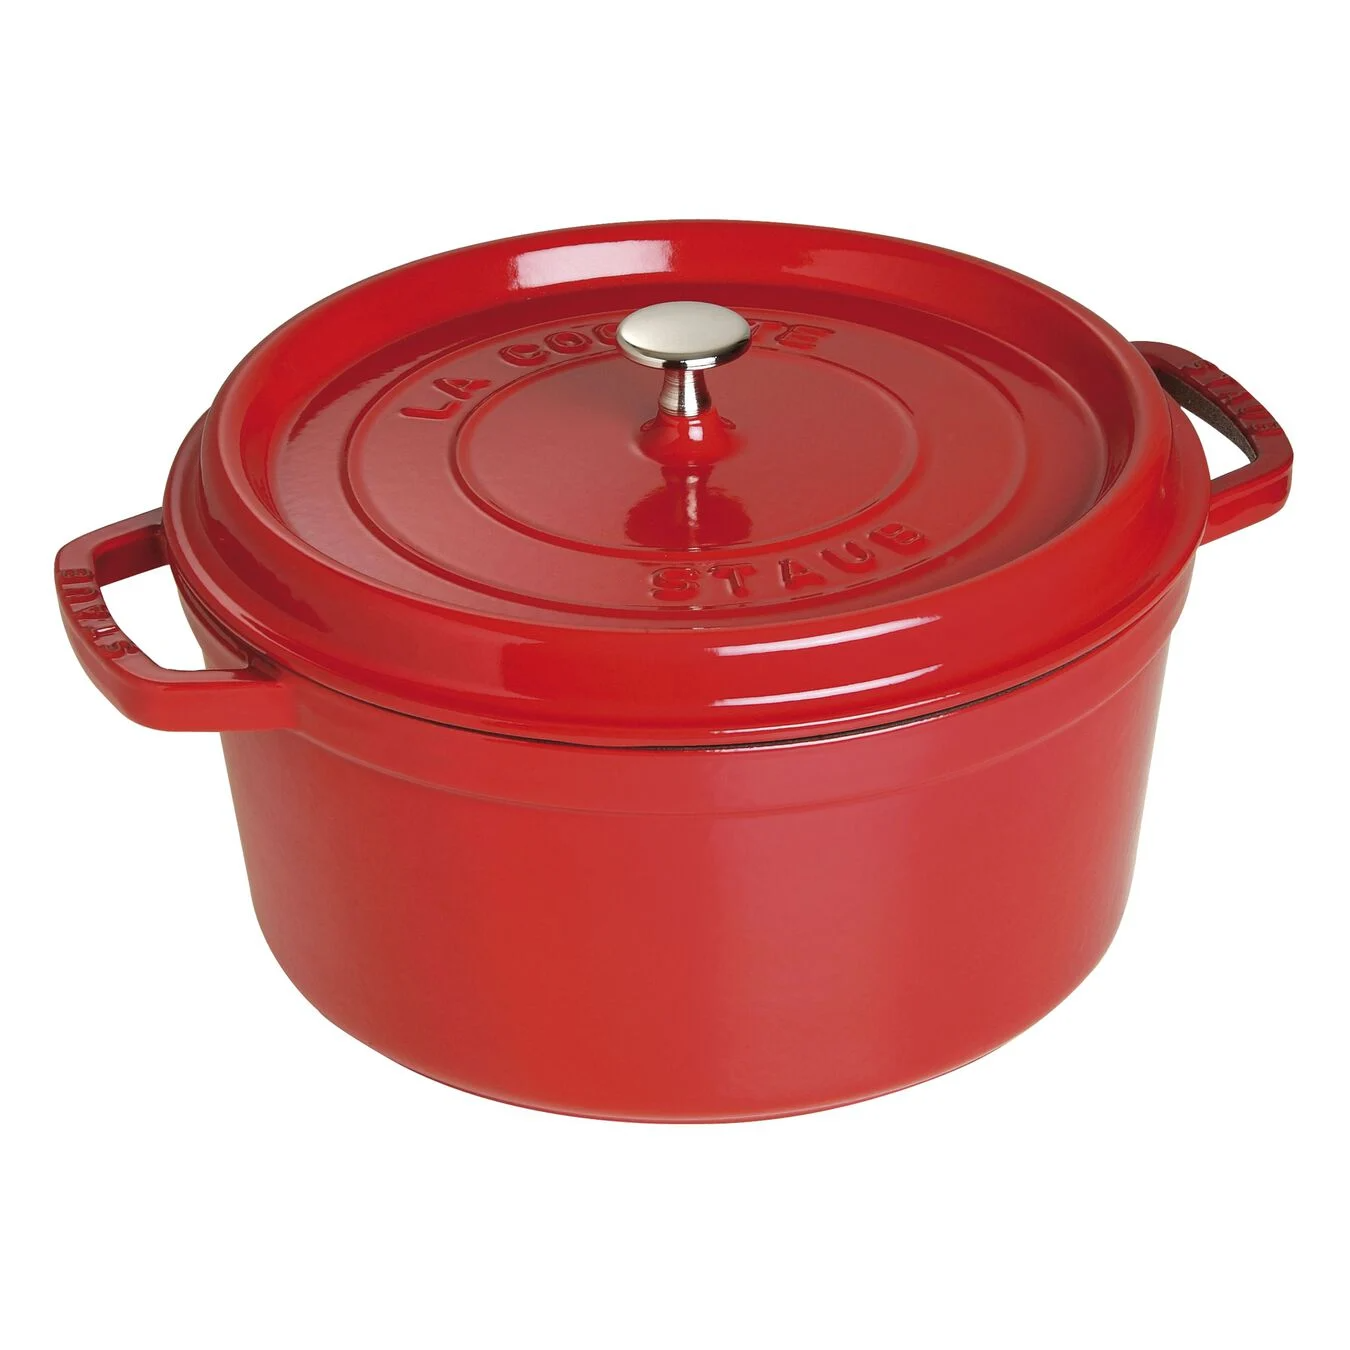 Emile Henry Sublime Stewpot in Sienna Red